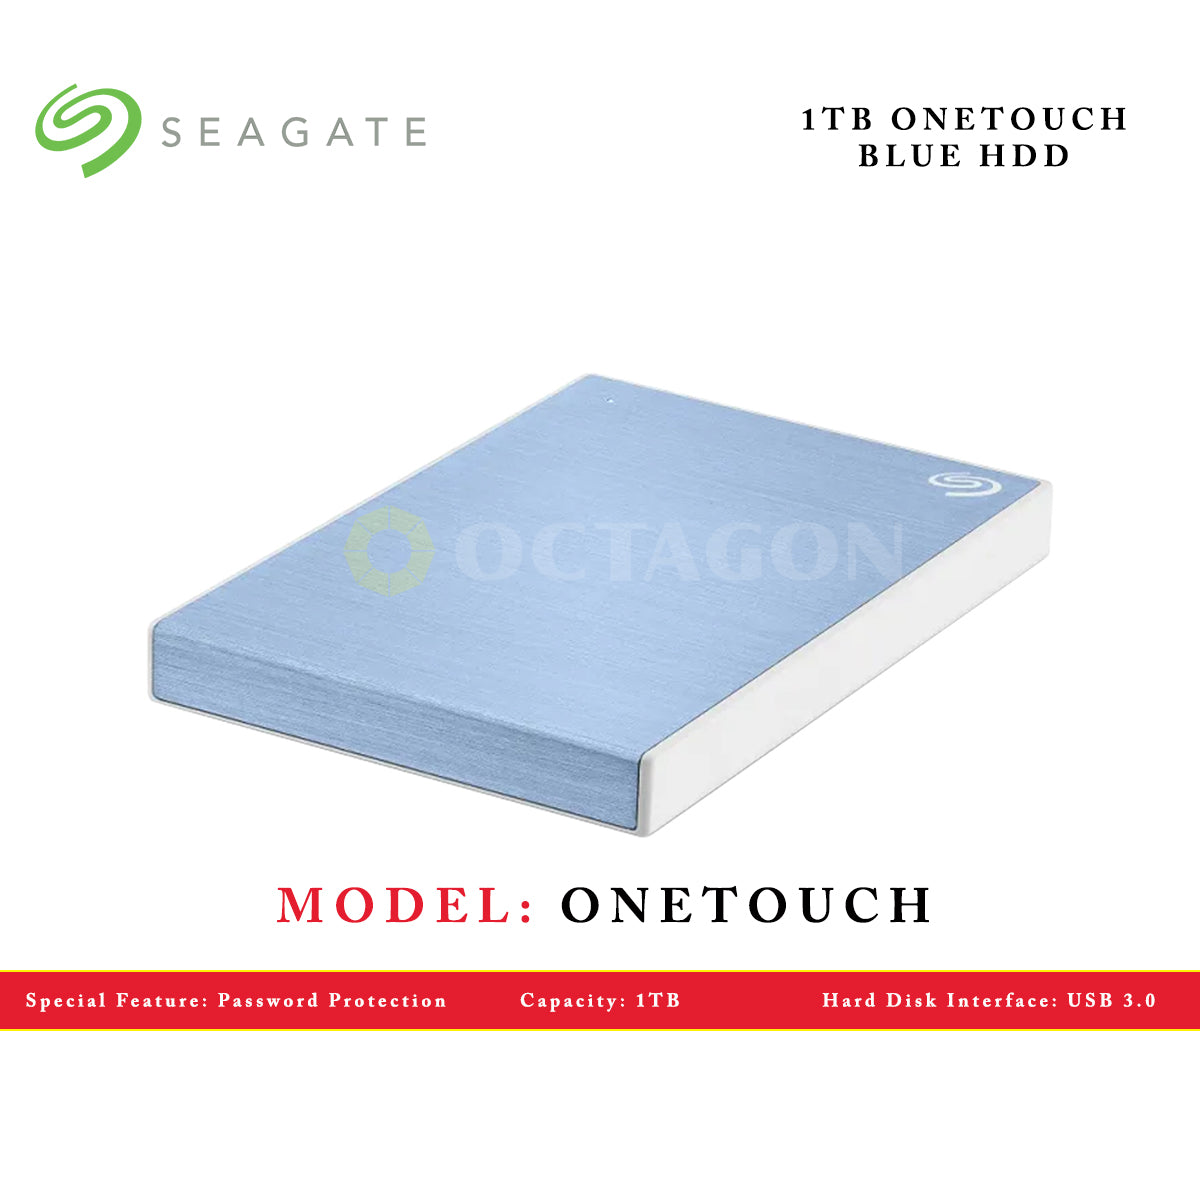 SEAGATE 1TB ONETOUCH HDD W/ PW